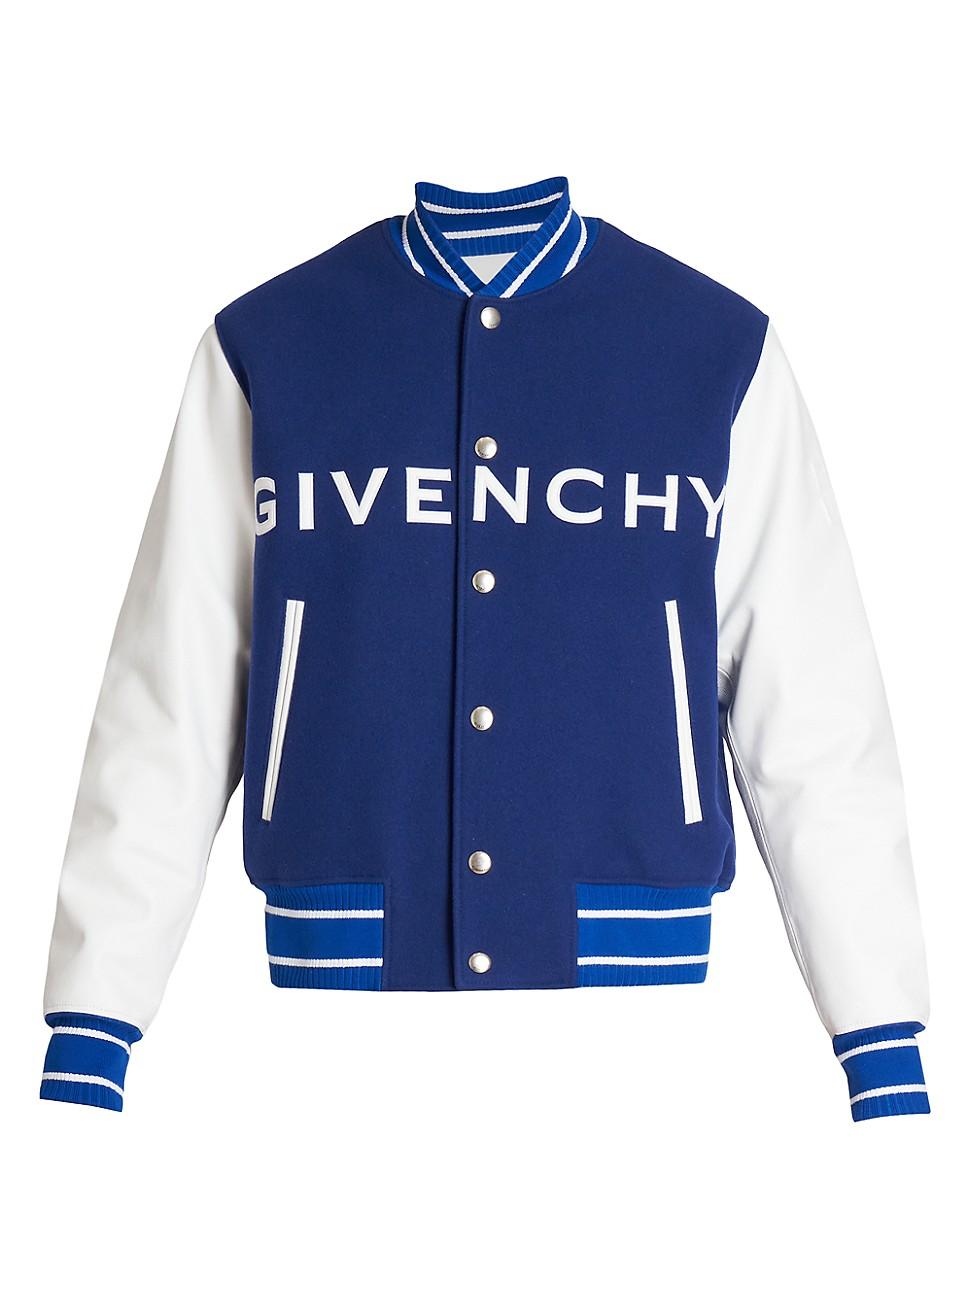 Givenchy Logo Wool & Leather Varsity Jacket in Blue for Men | Lyst